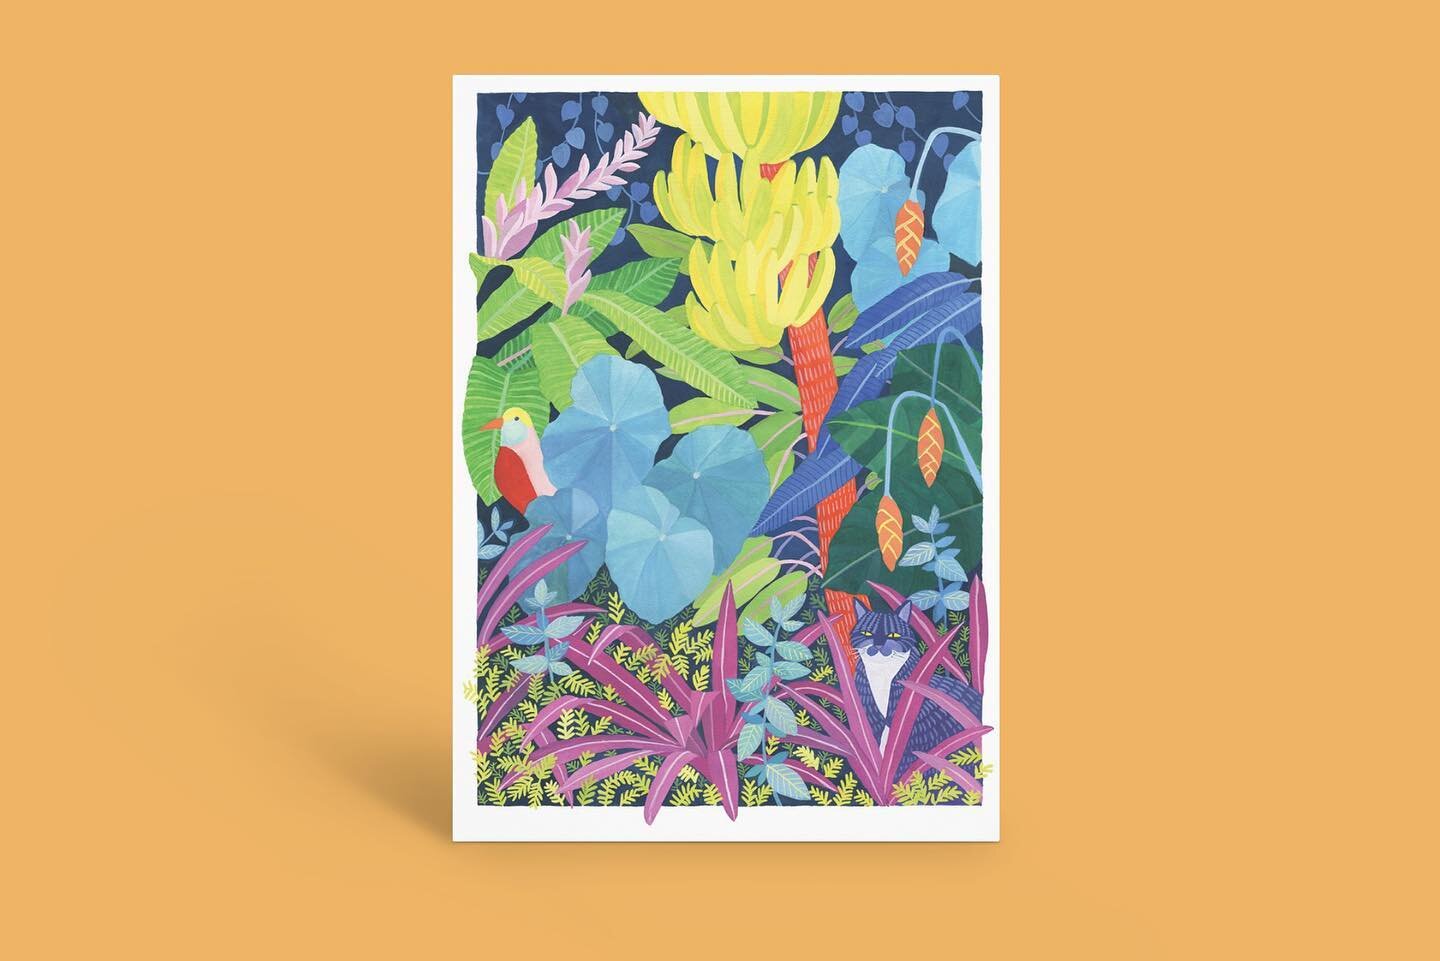 AHD NEW : Welcome back to AHD artist @sars_stricko! This is Sarah&rsquo;s second series with AHD PAPER CO. and we are thrilled to have Sarah back.

Pictured is &lsquo;ELI&rsquo;S JUNGLE&rsquo; one of three beautiful gauche painted card designs, that 